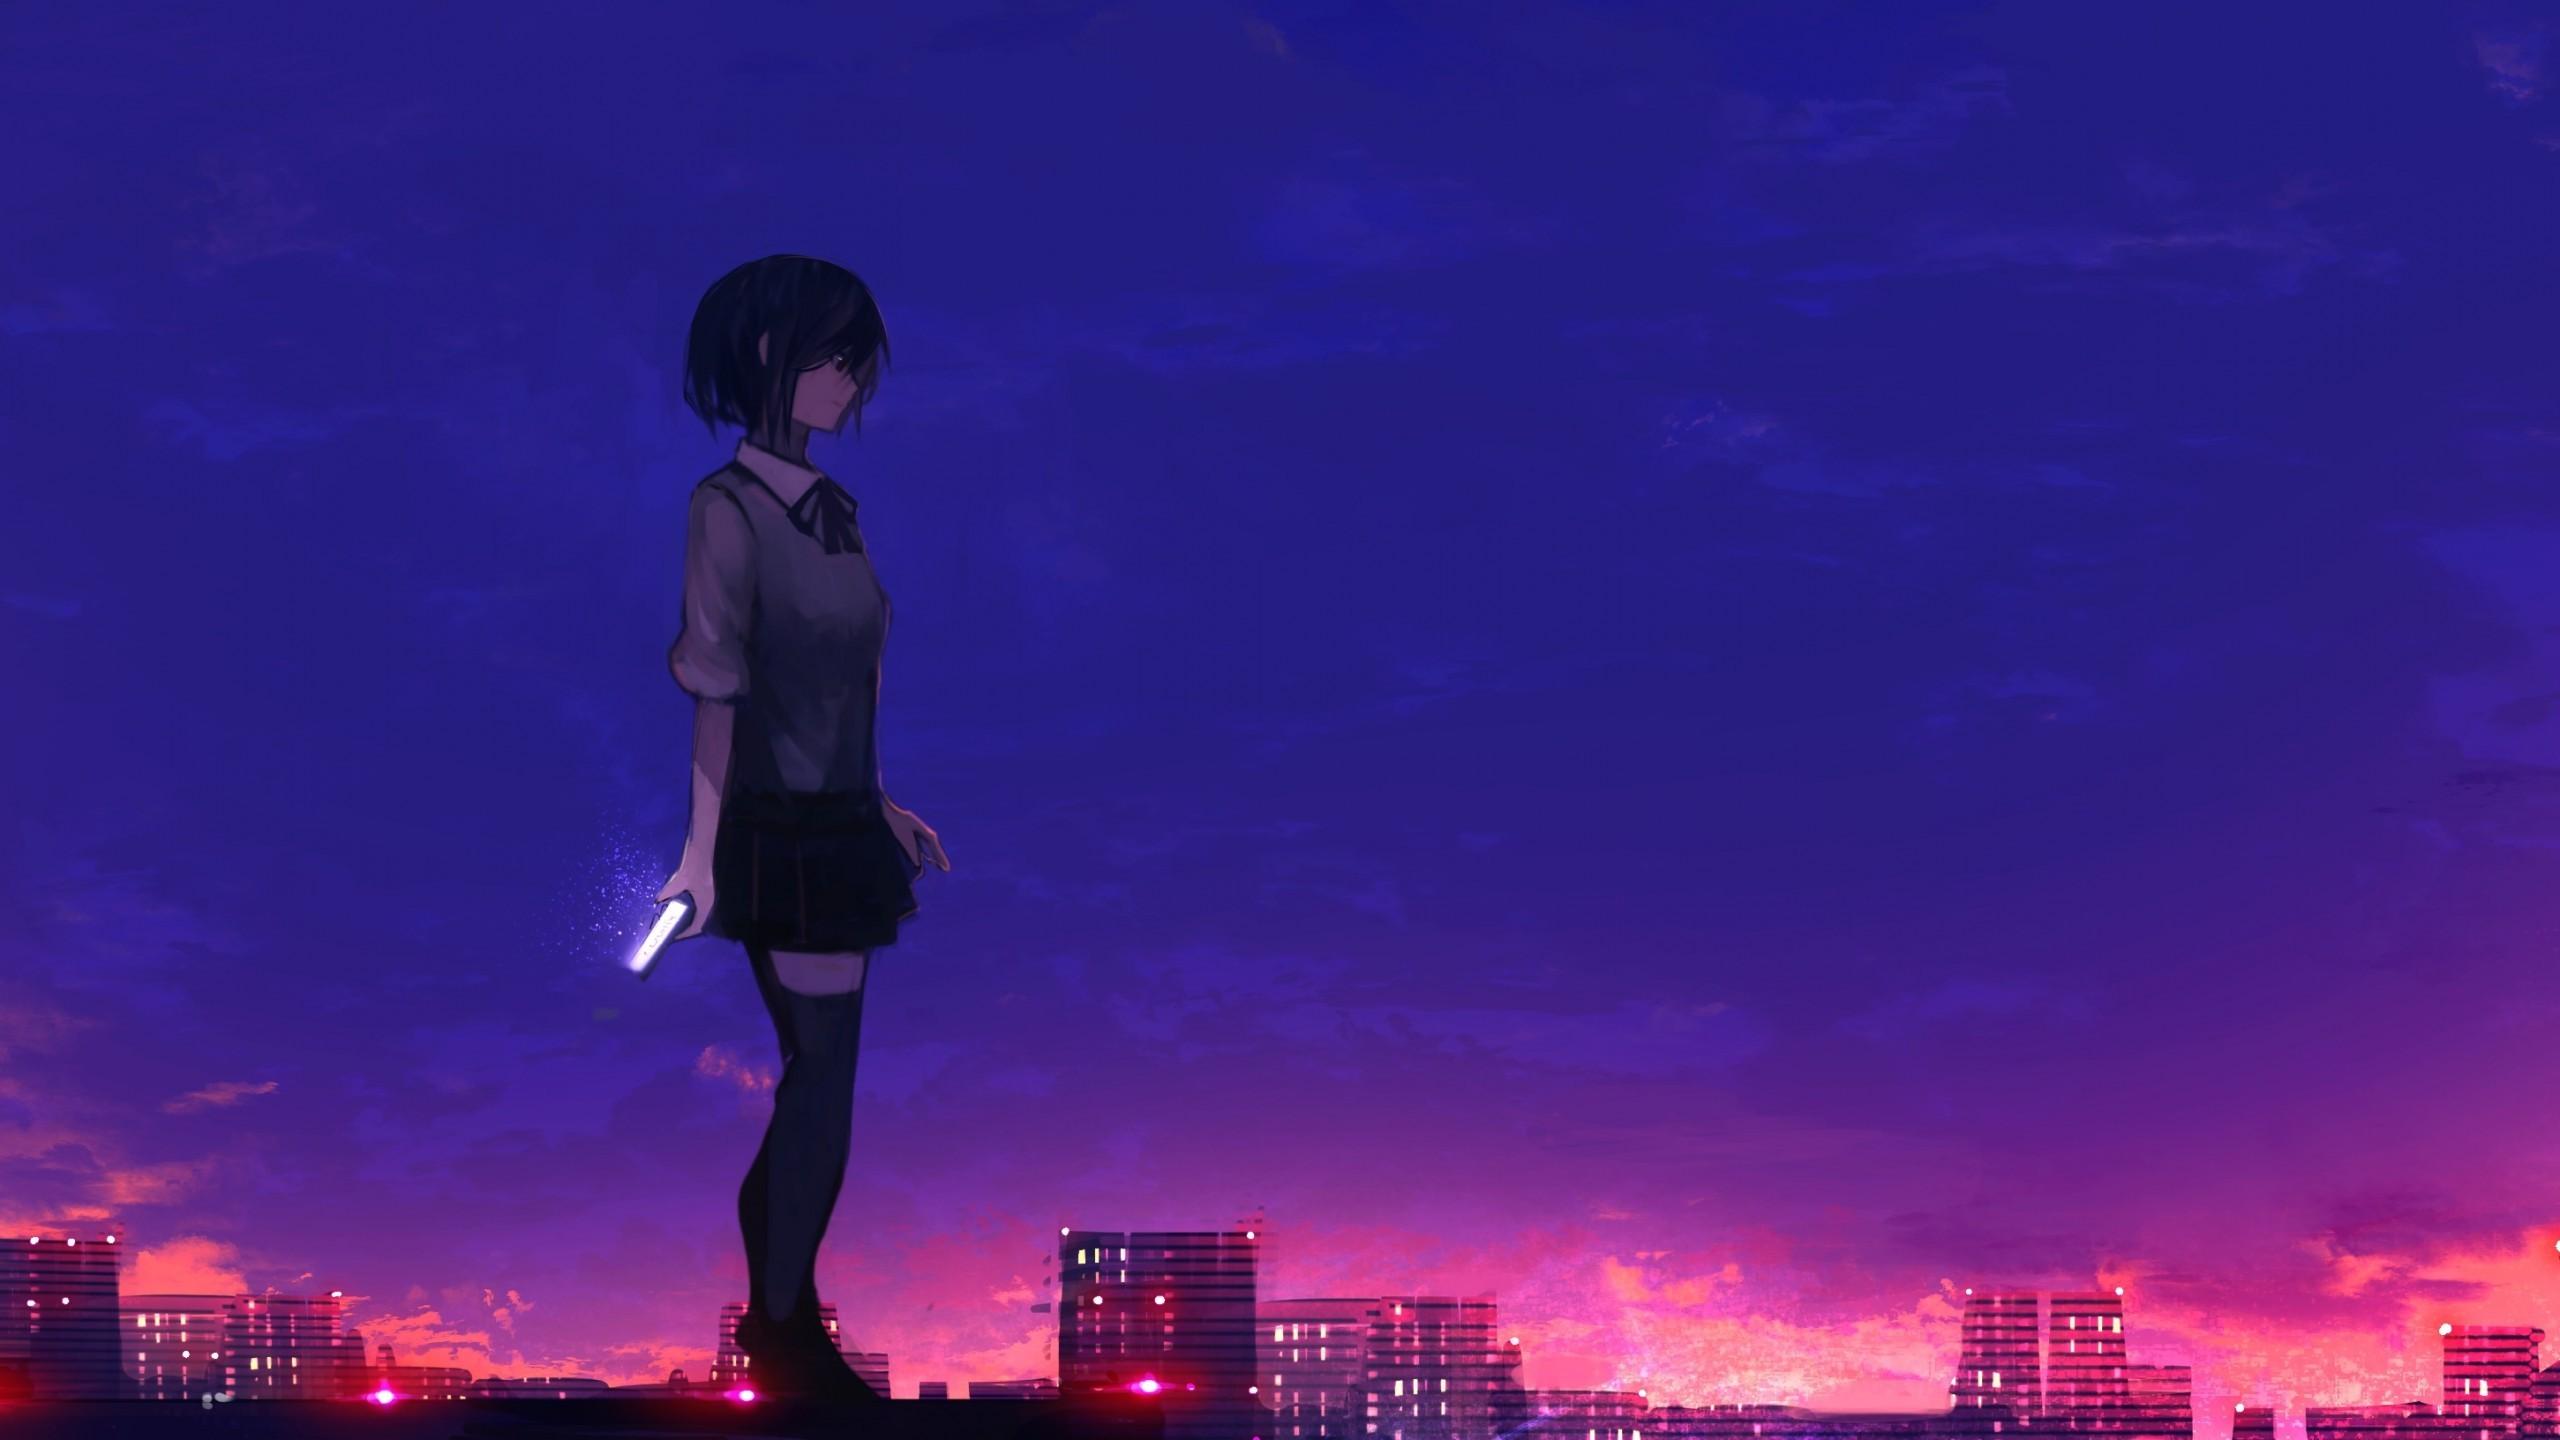 Download 2560x1440 Anime Girl, Rooftop, Buildings, Sunset